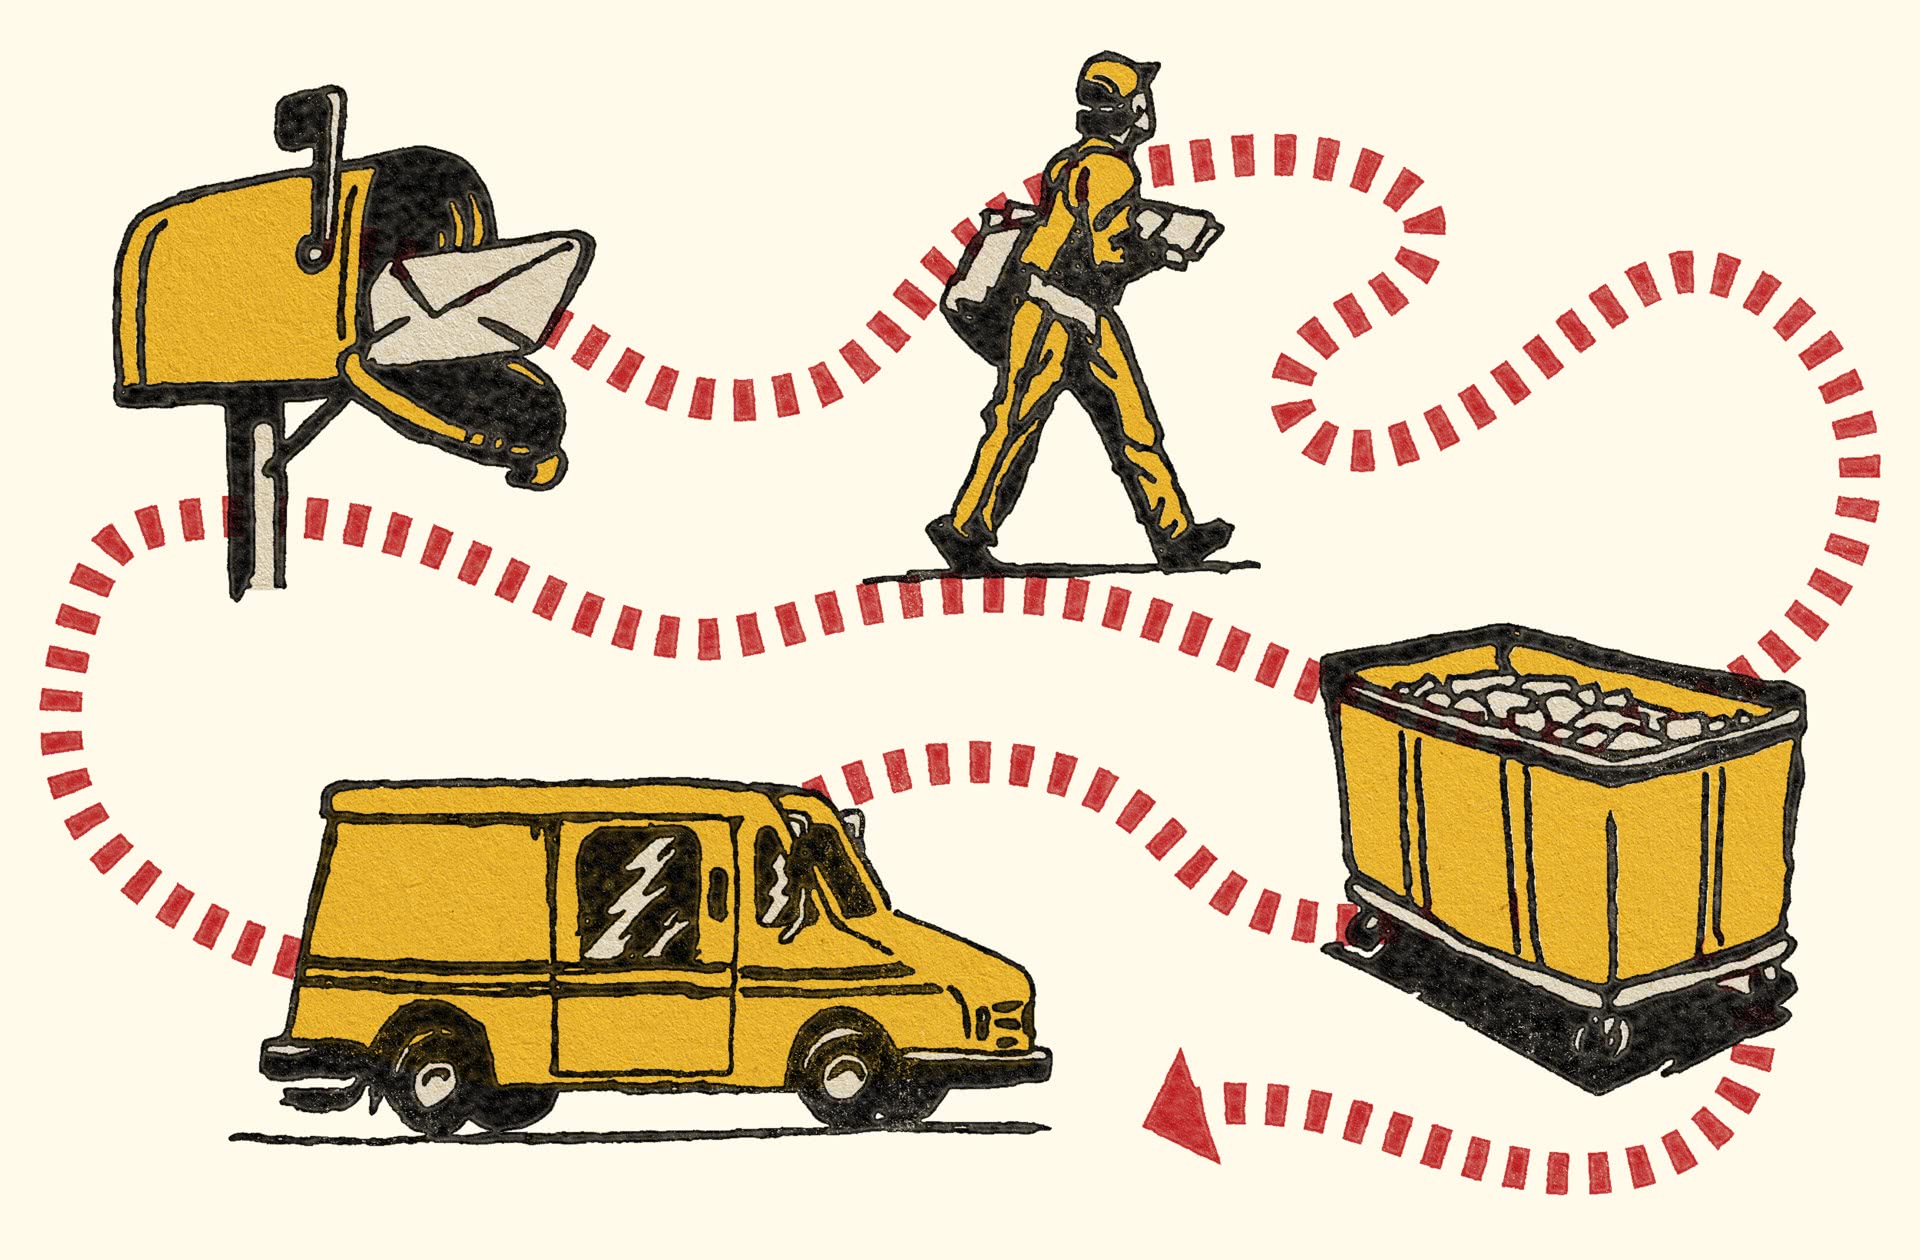 Diagram showing how mail works, with a home mailbox, carrier, truck, and parcel basket.